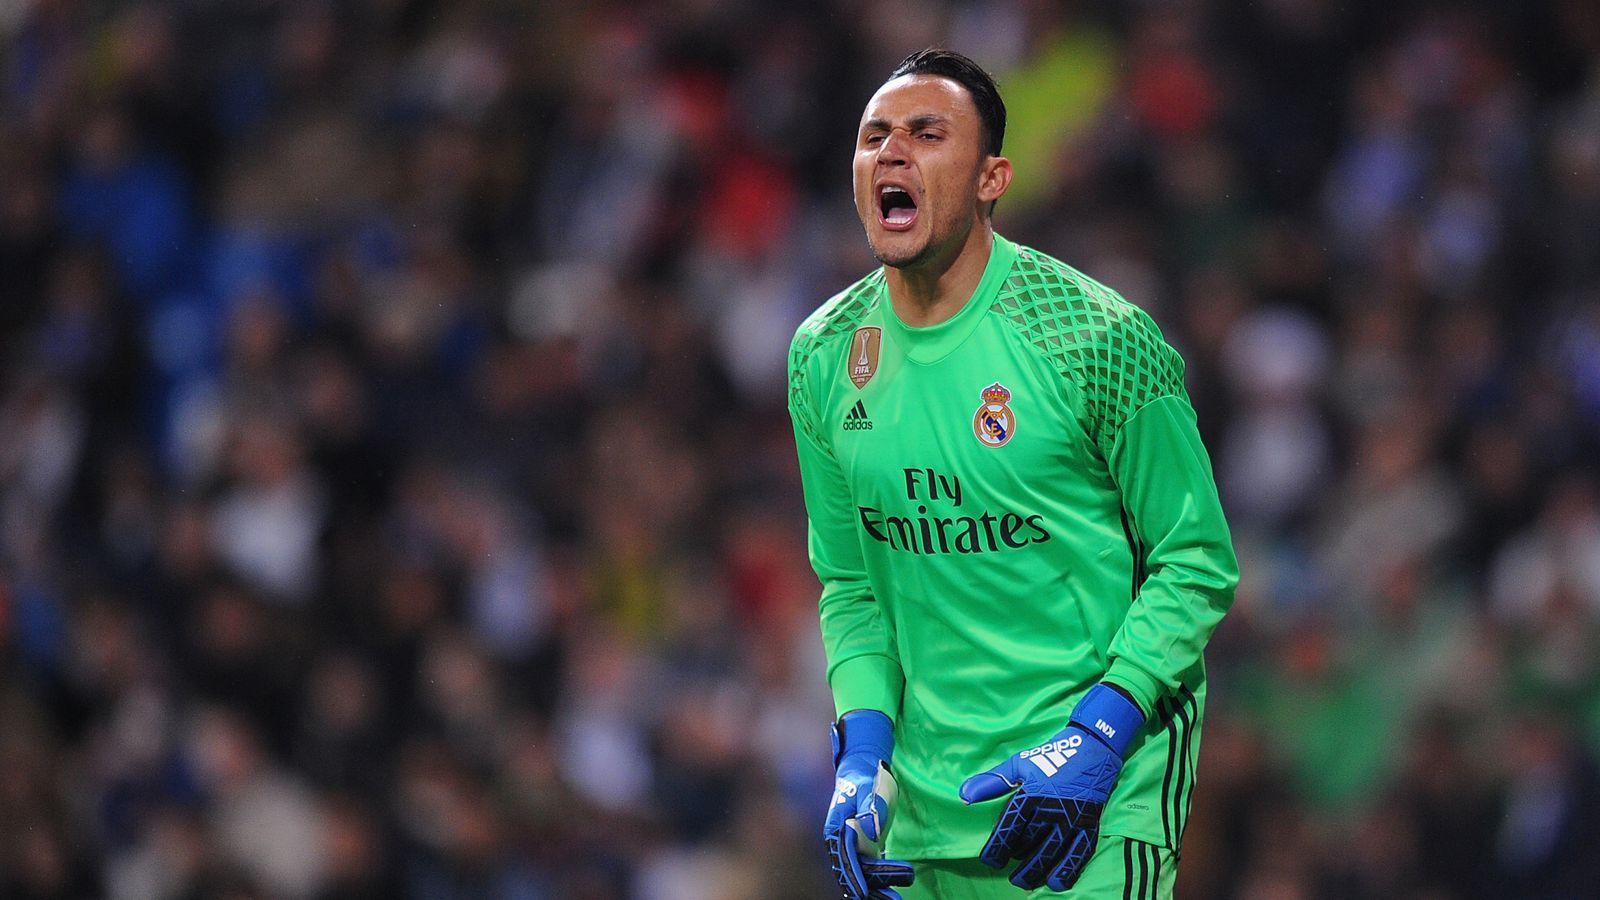 It's time to find Keylor Navas' replacement